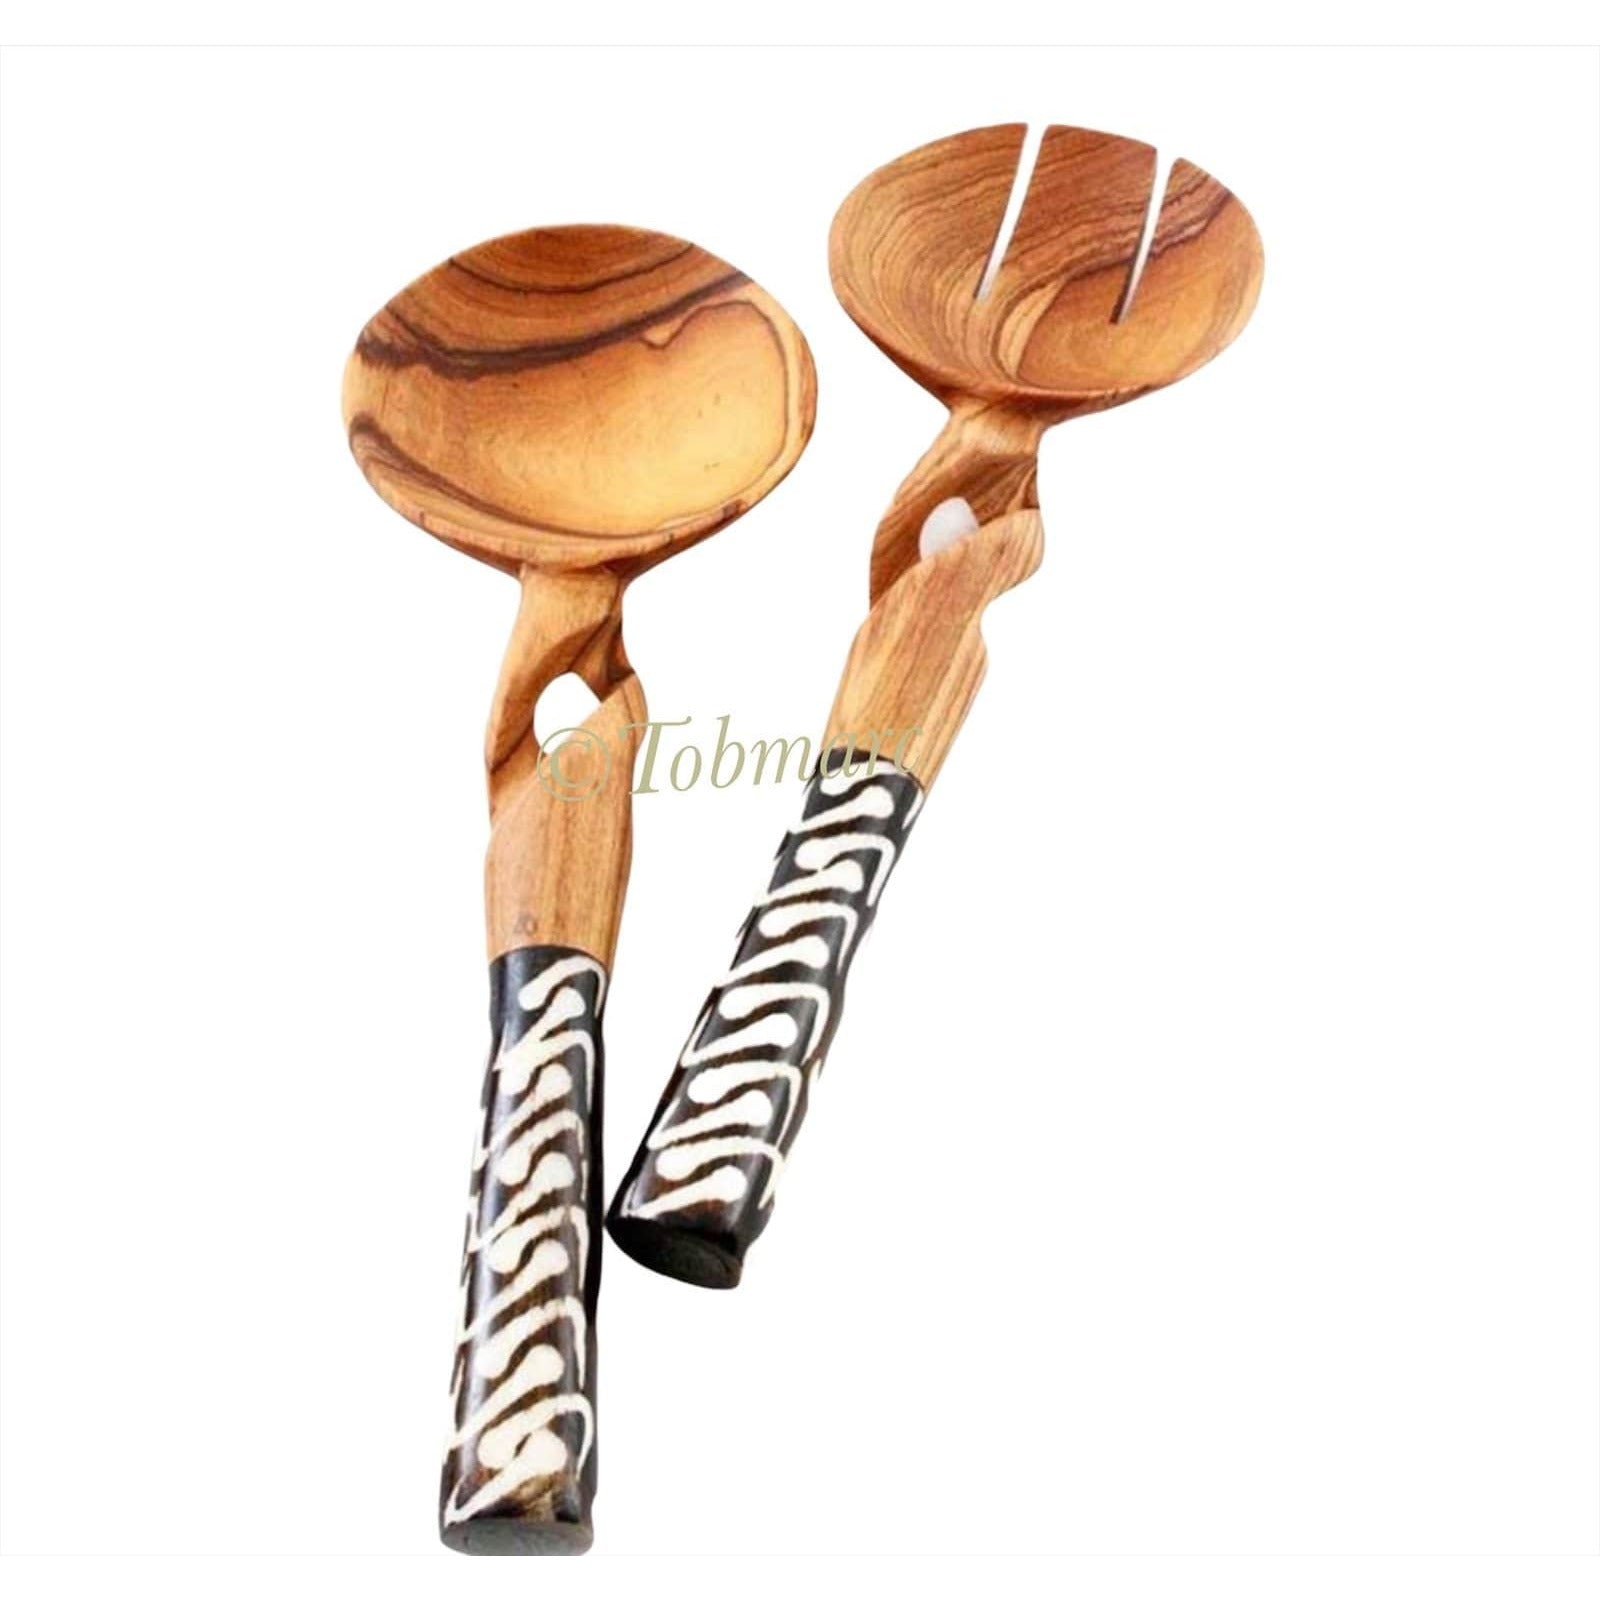 Tobmarc Home Decor & Gifts  Set of Assorted handcrafted Olive wood serving spoons